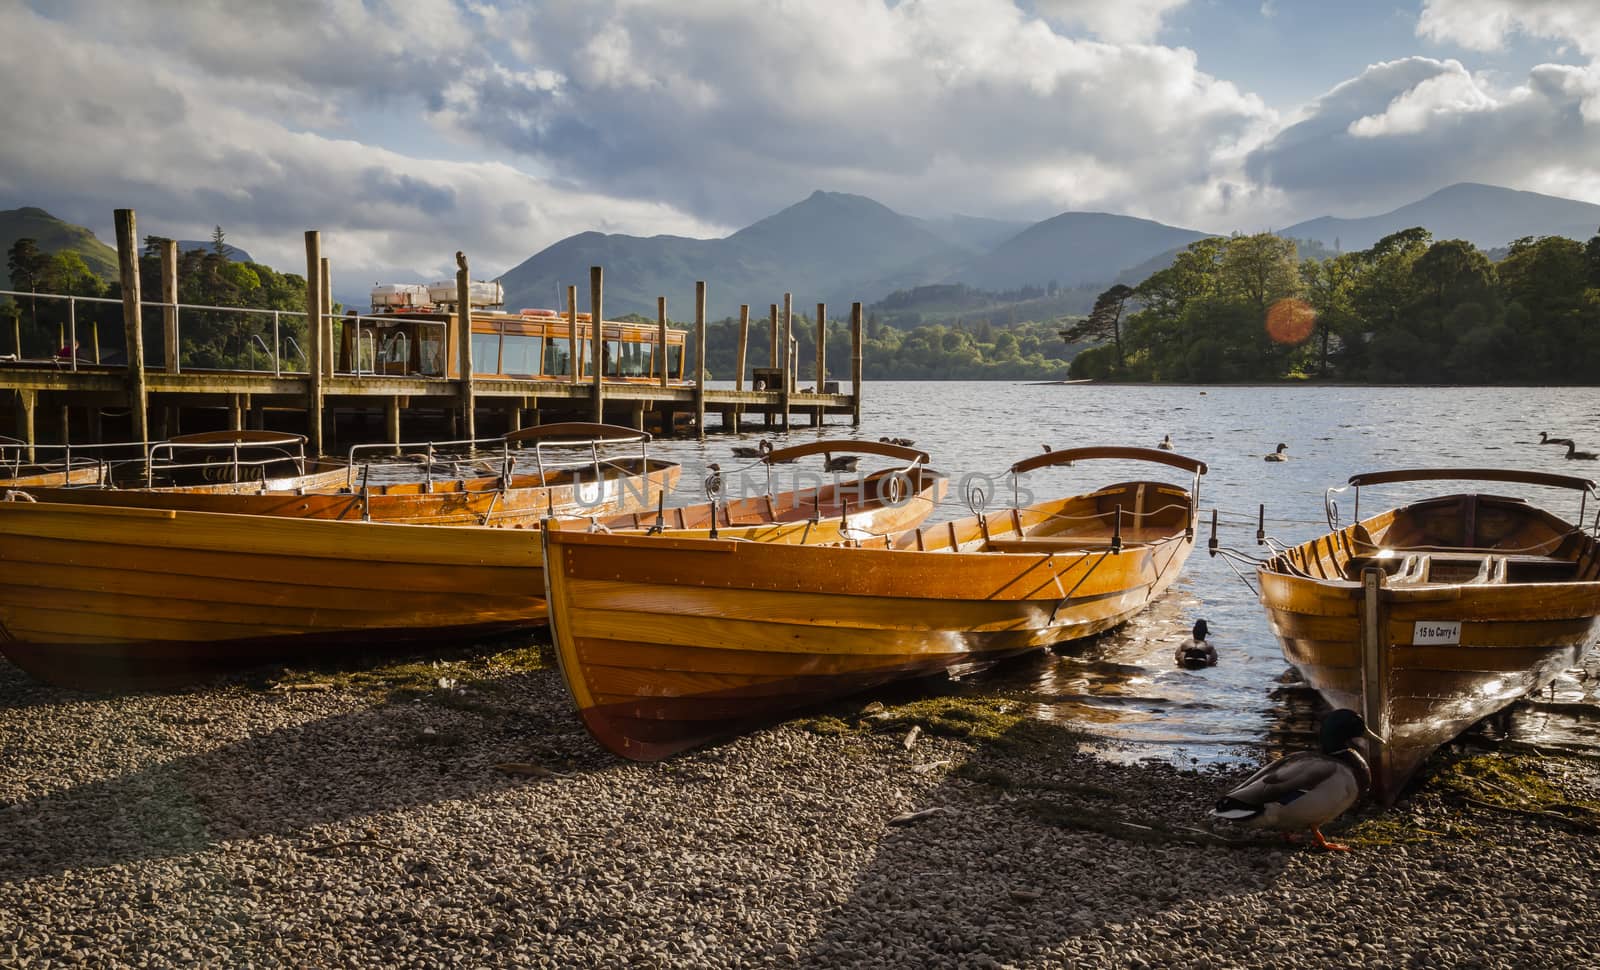 Rowing boats at Derwentwater in the evening light